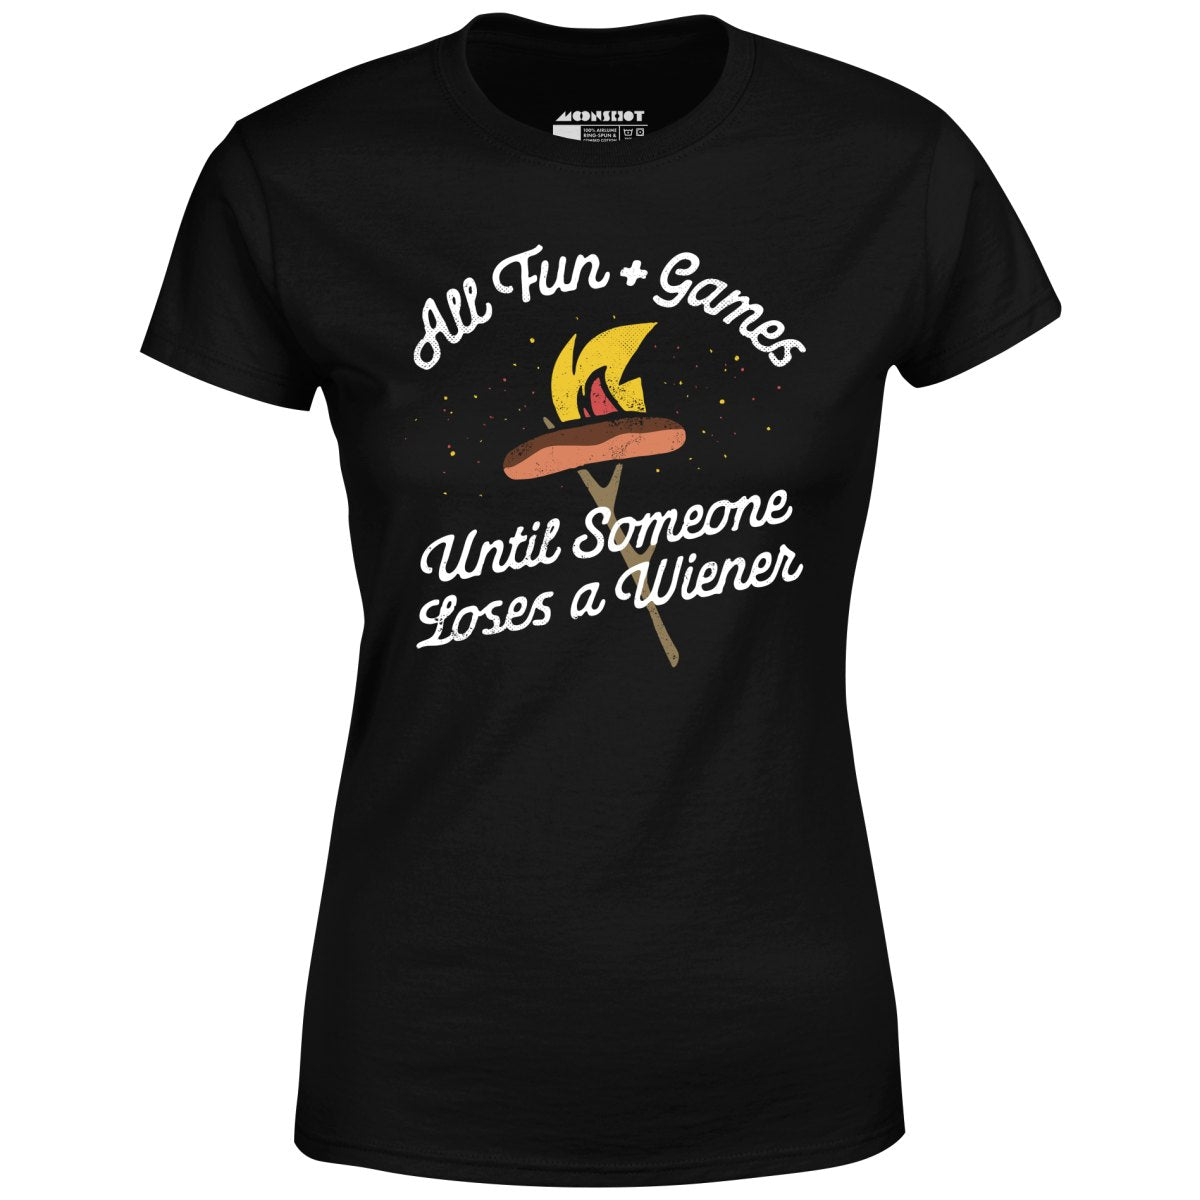 All Fun & Games Until Someone Loses a Wiener - Women's T-Shirt